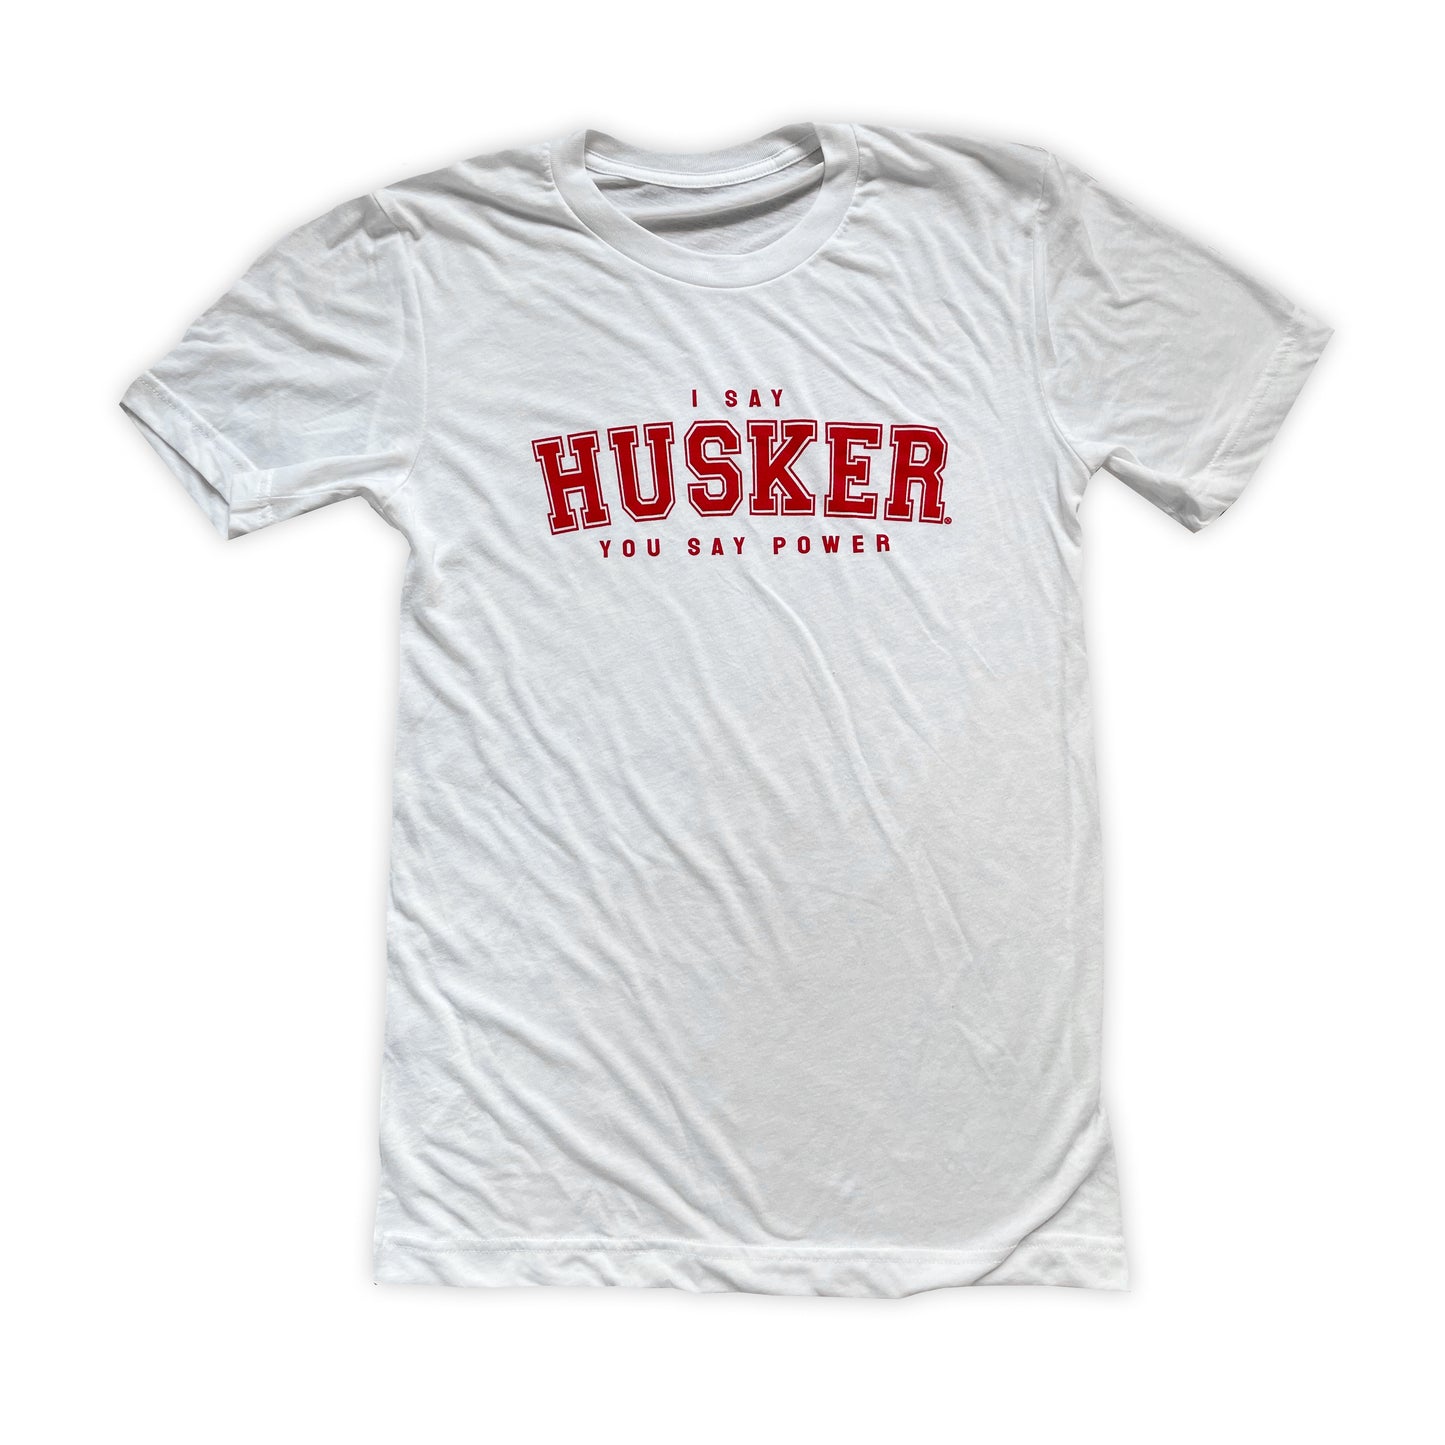 When I Say Husker tee